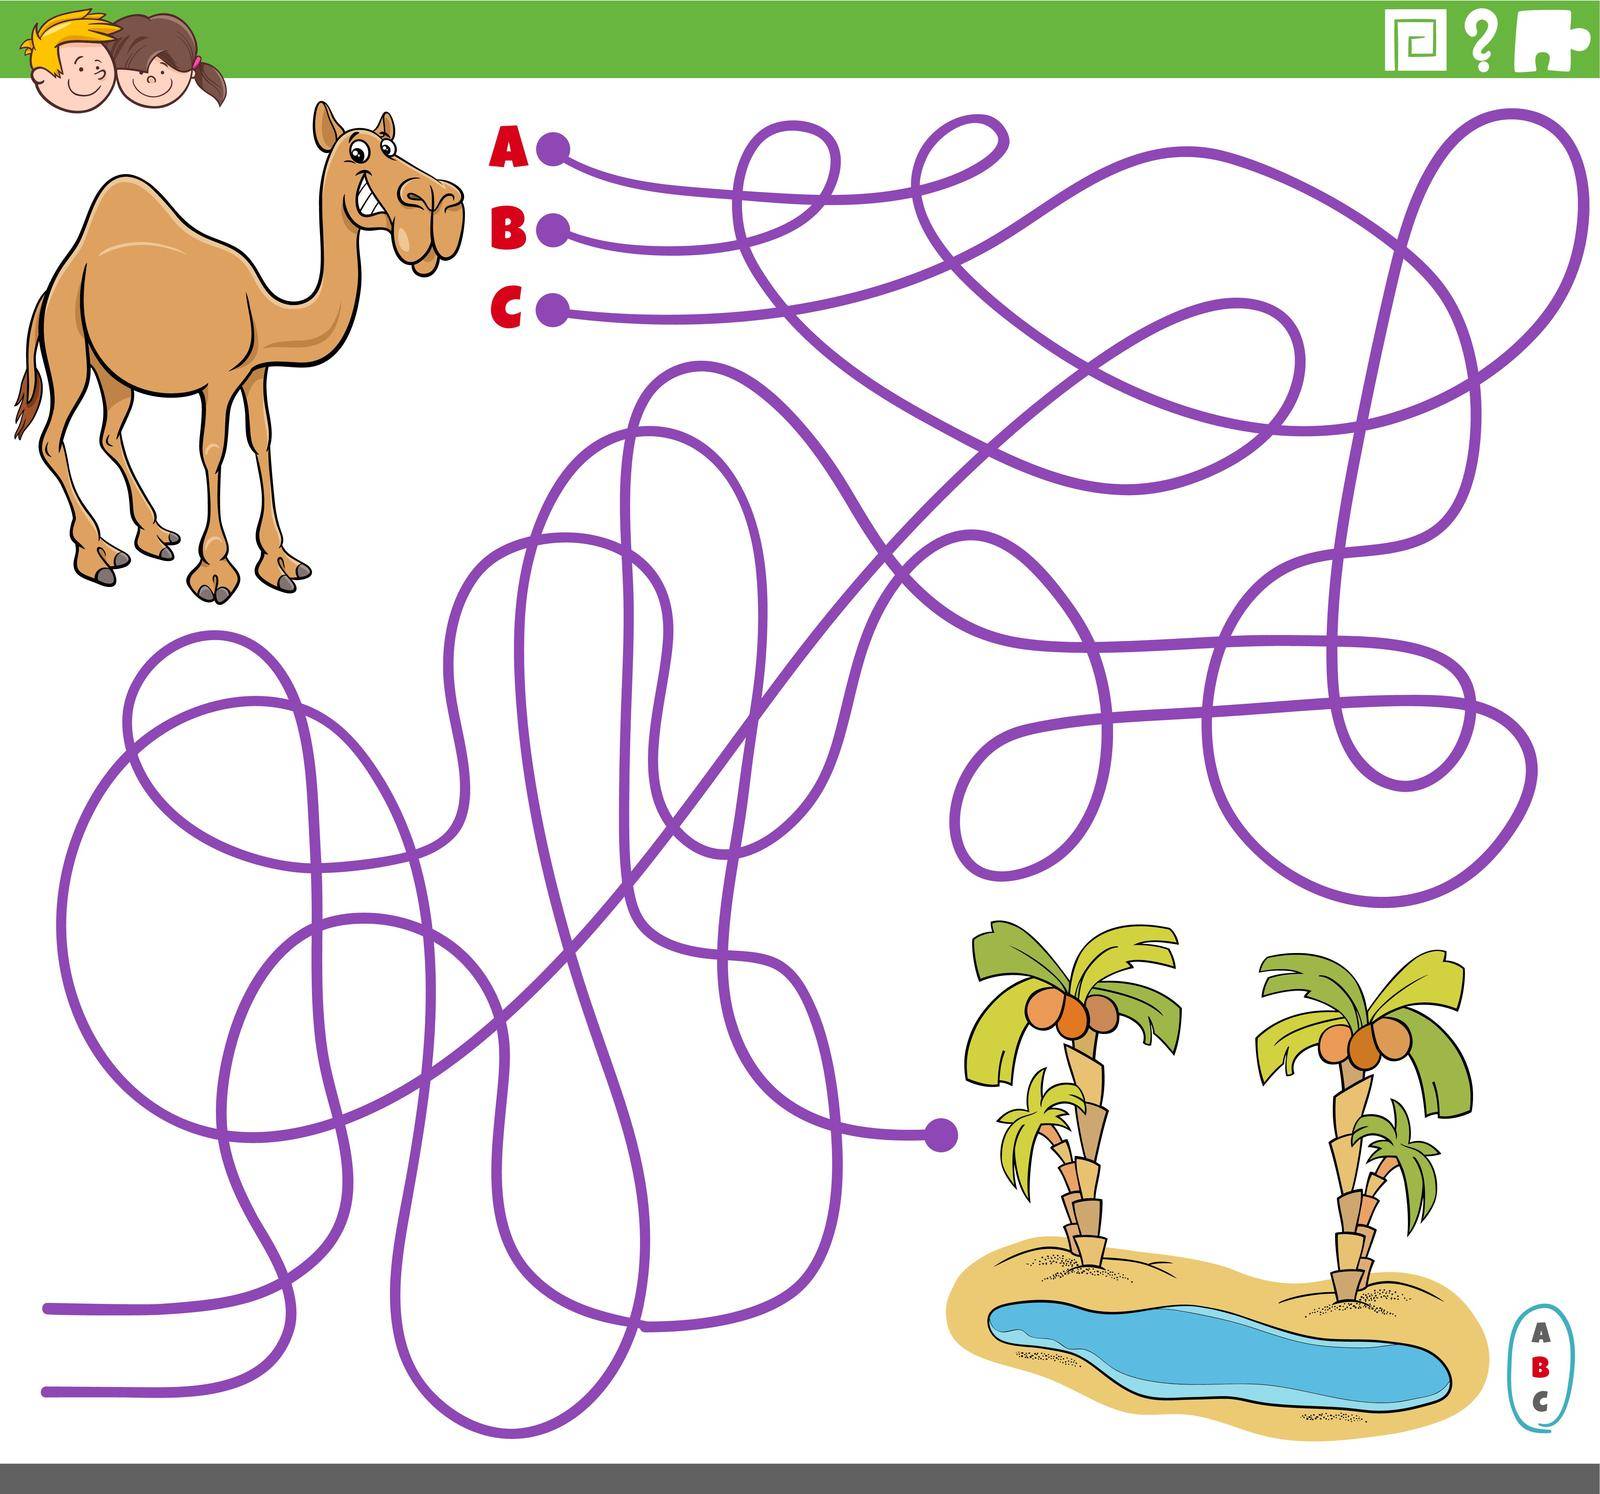 Cartoon illustration of lines maze puzzle game with dromedary camel animal character and oasis